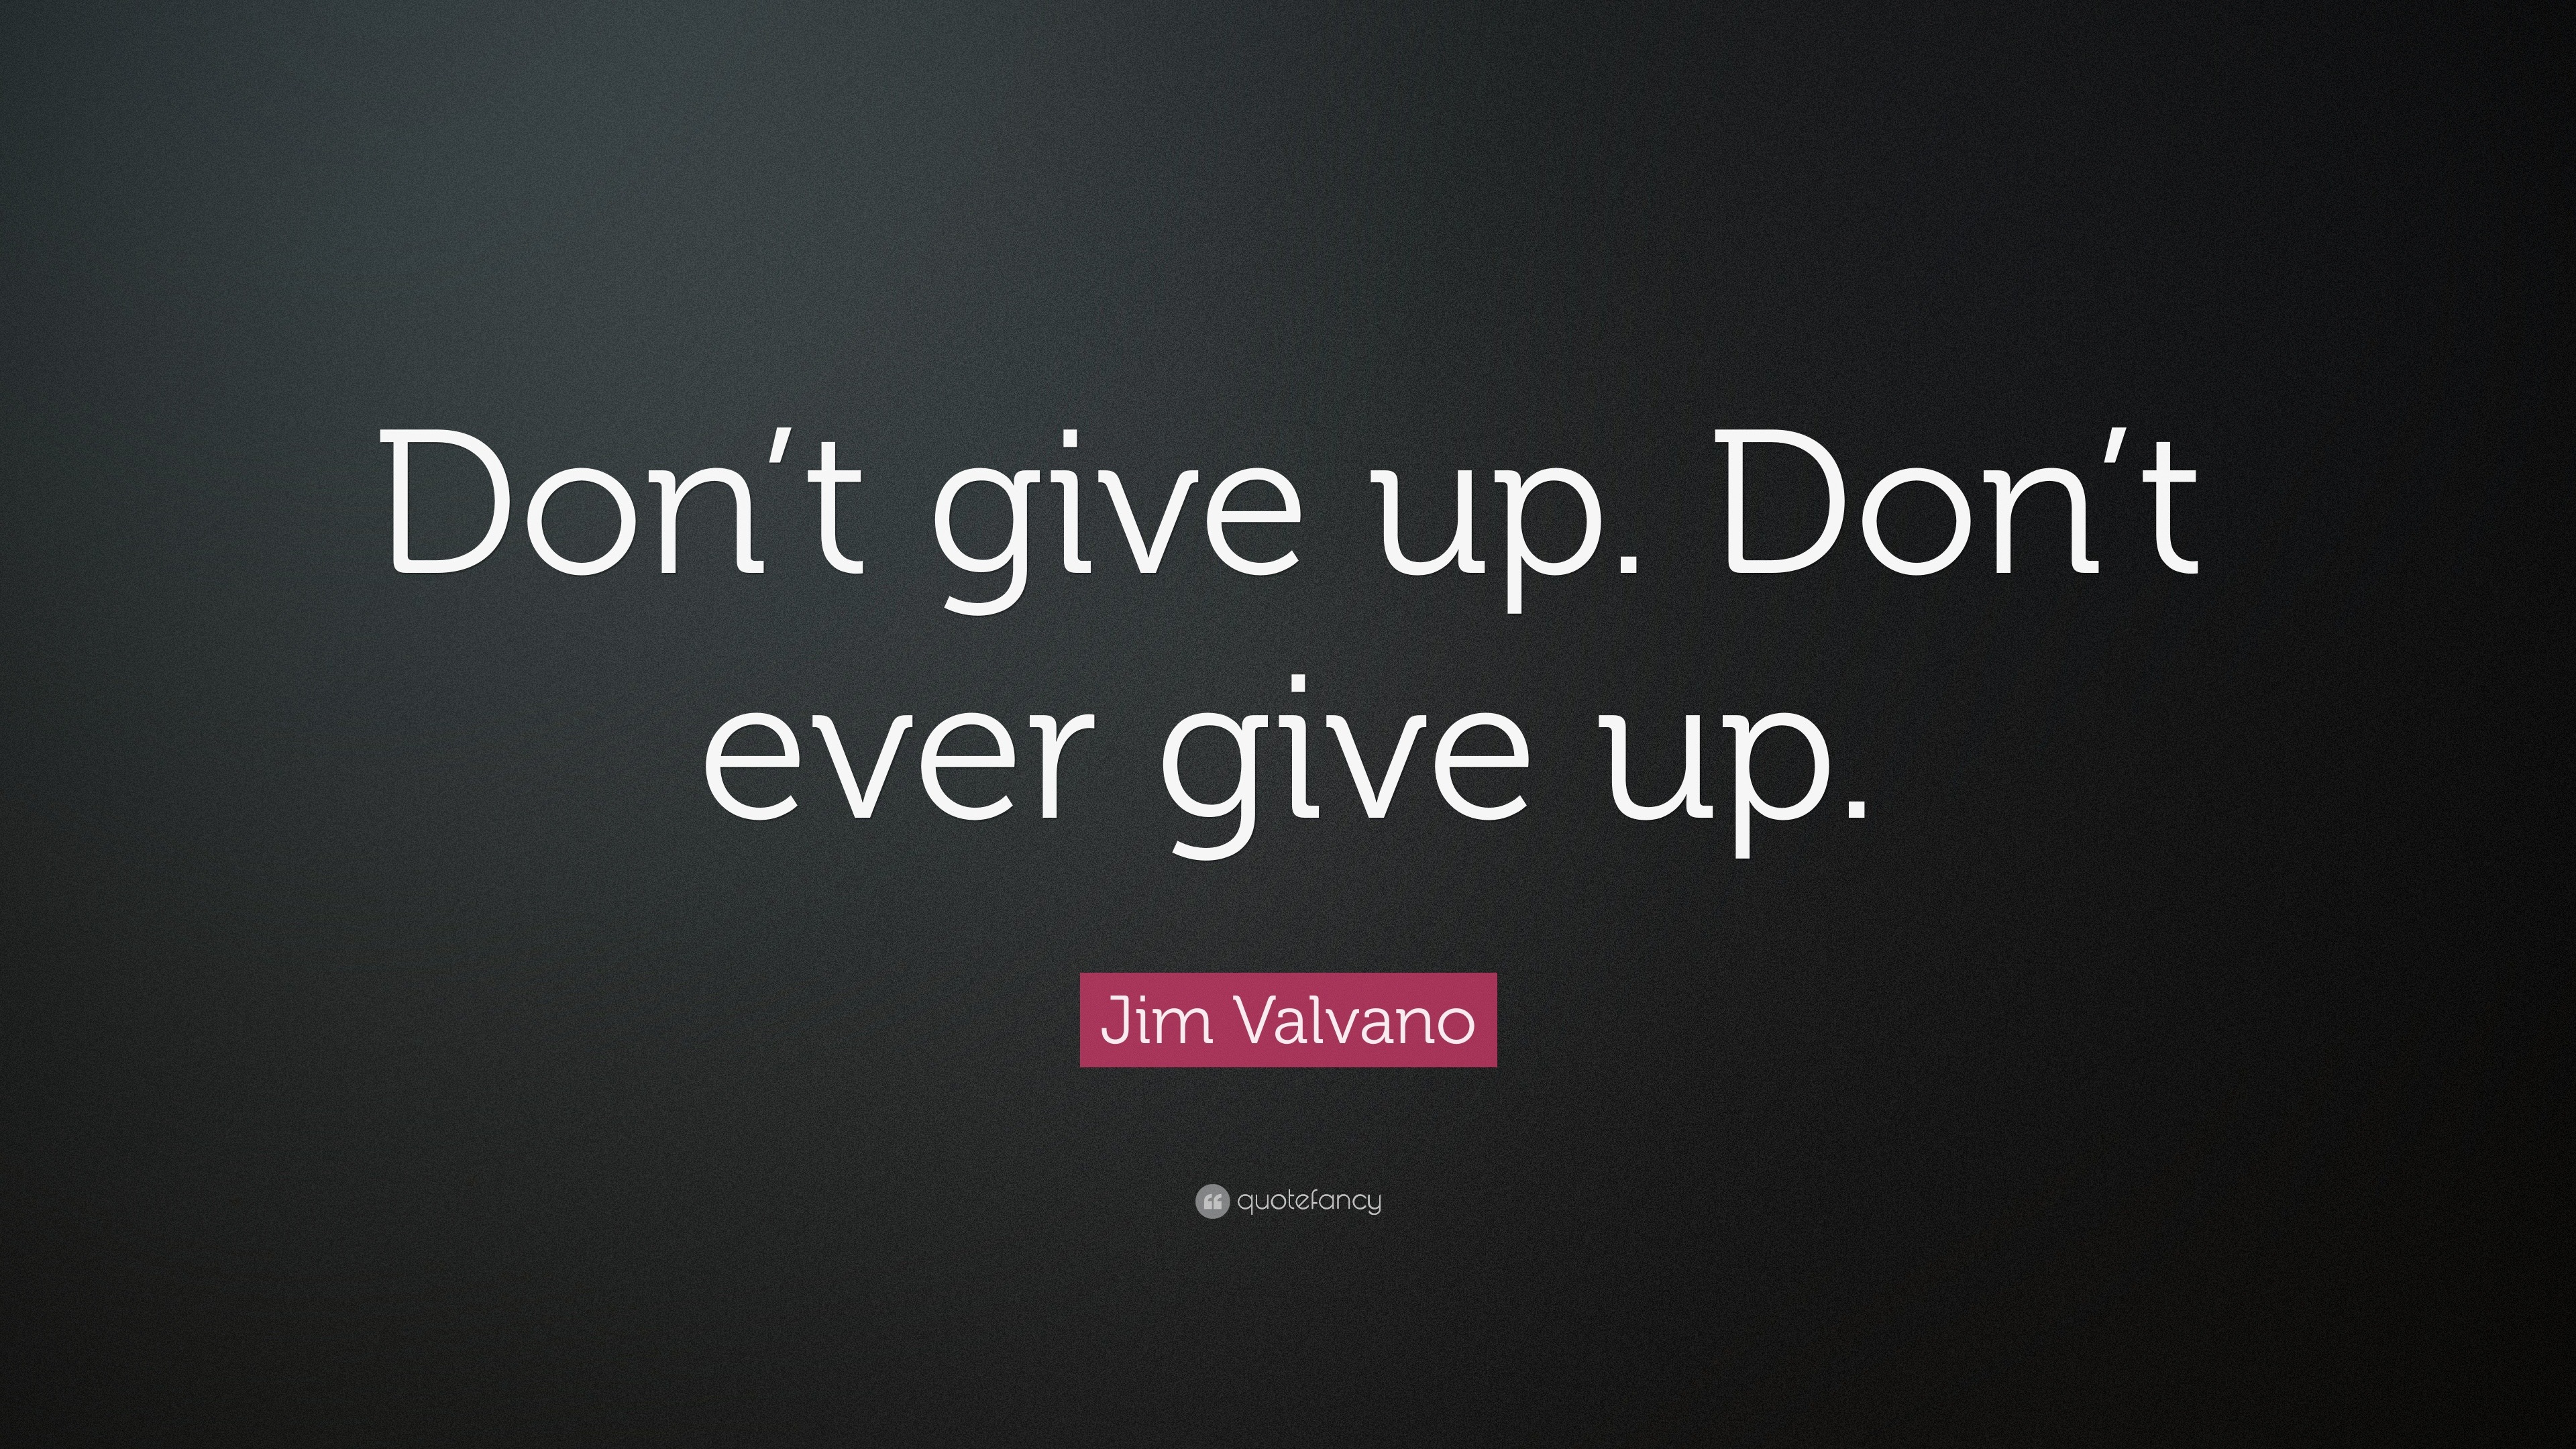 37374 Jim Valvano Quote Don t give up Don t ever give up